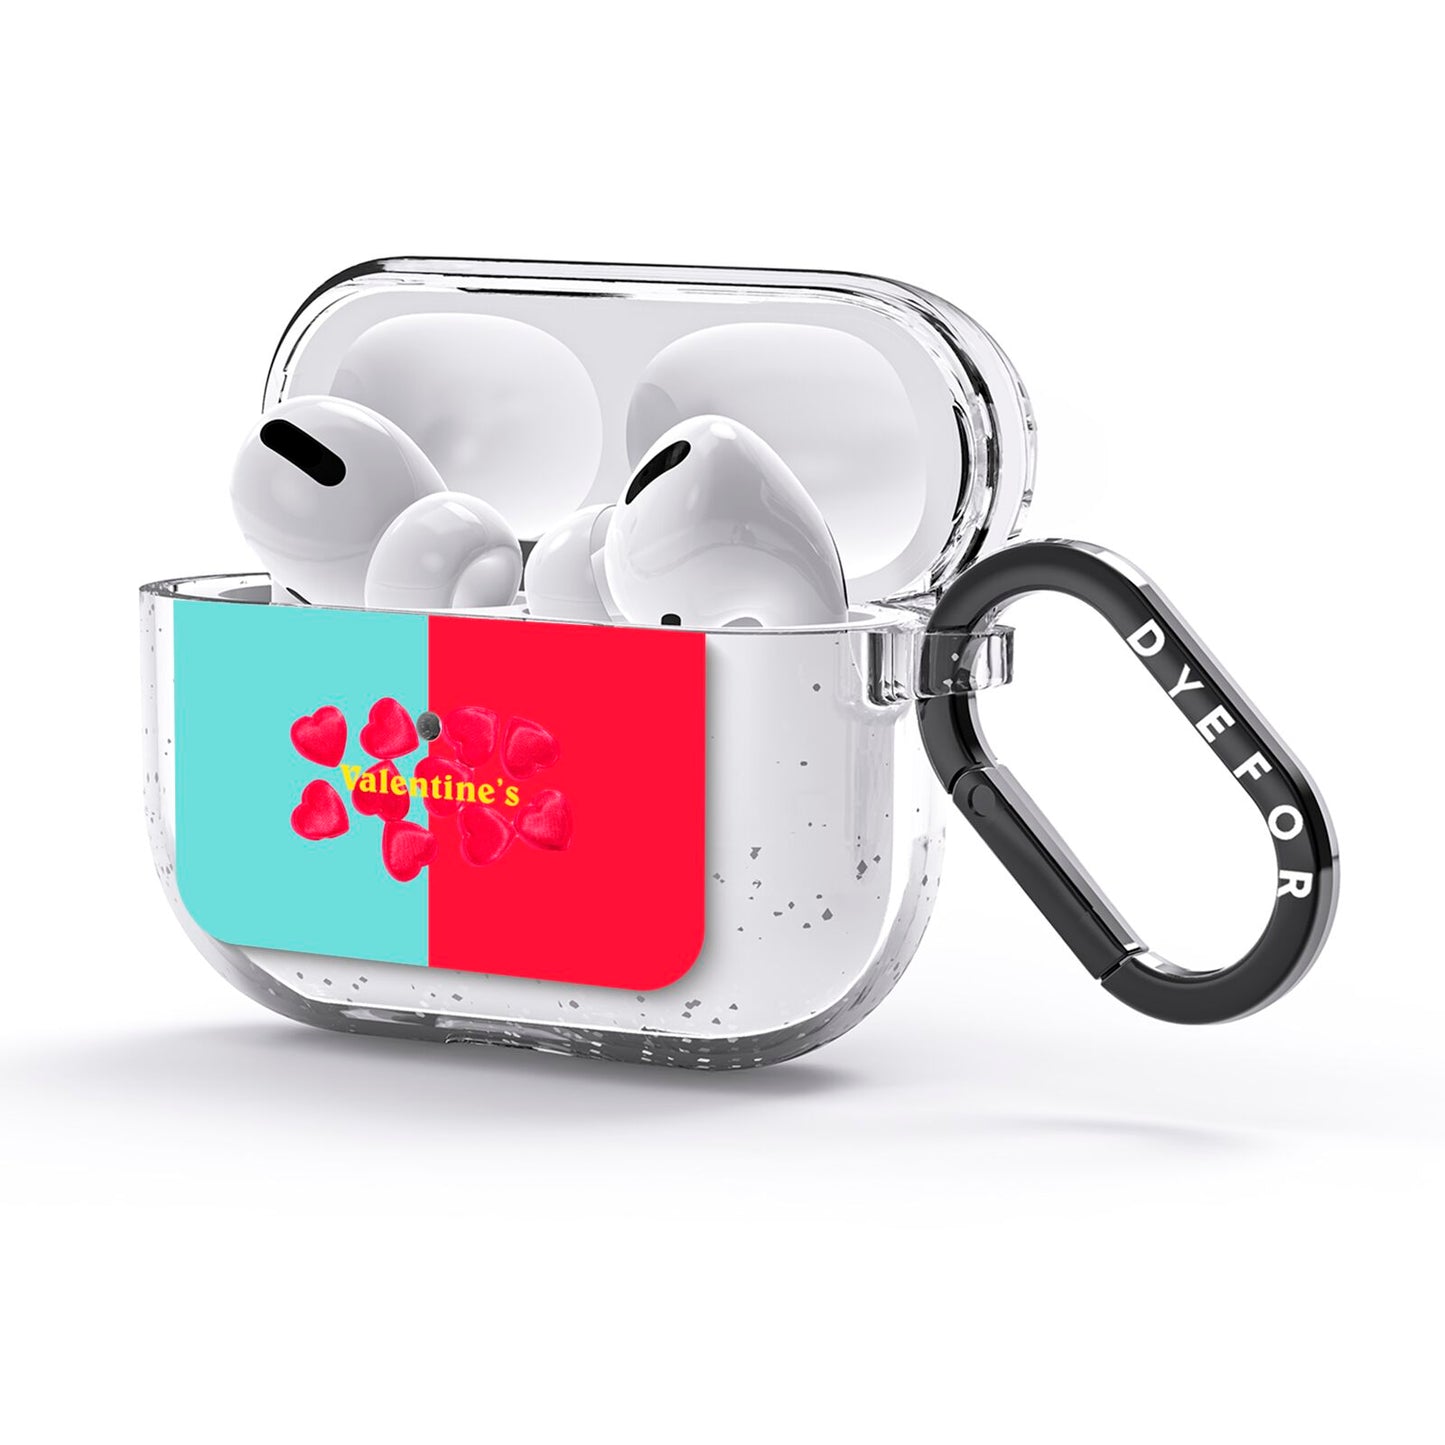 Valentines Sweets AirPods Glitter Case 3rd Gen Side Image